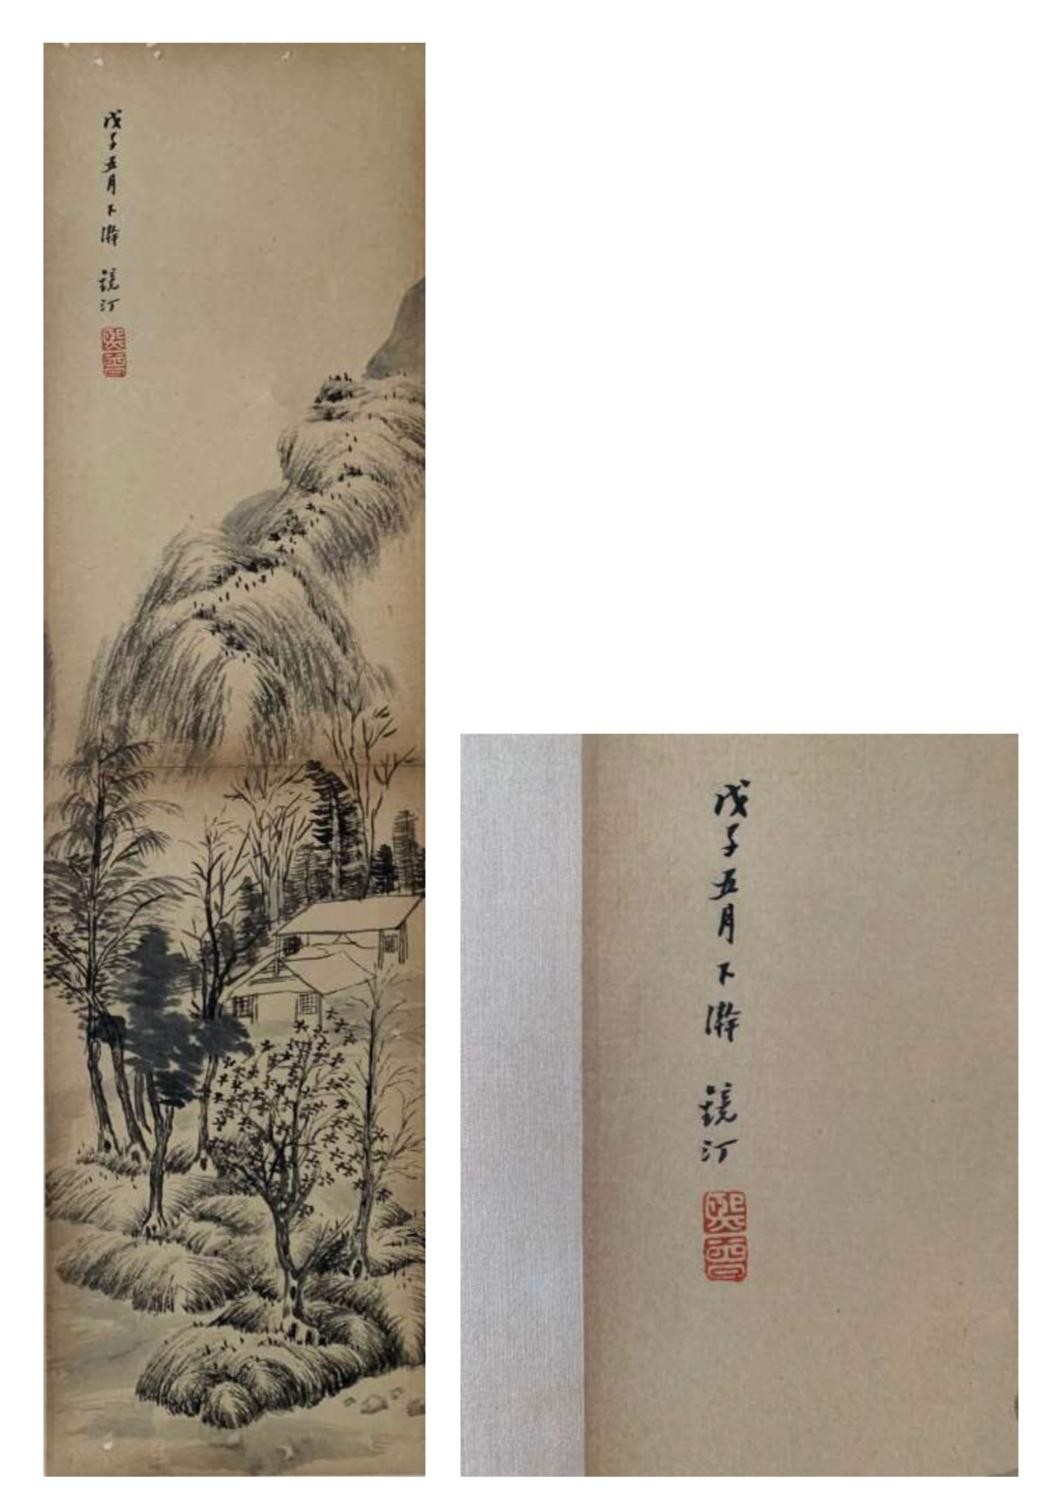 Landscape: Imitates Wang Hui's style. Chinese ink on paper scroll. Attribute to Wu Jingting. 49. - Image 3 of 6